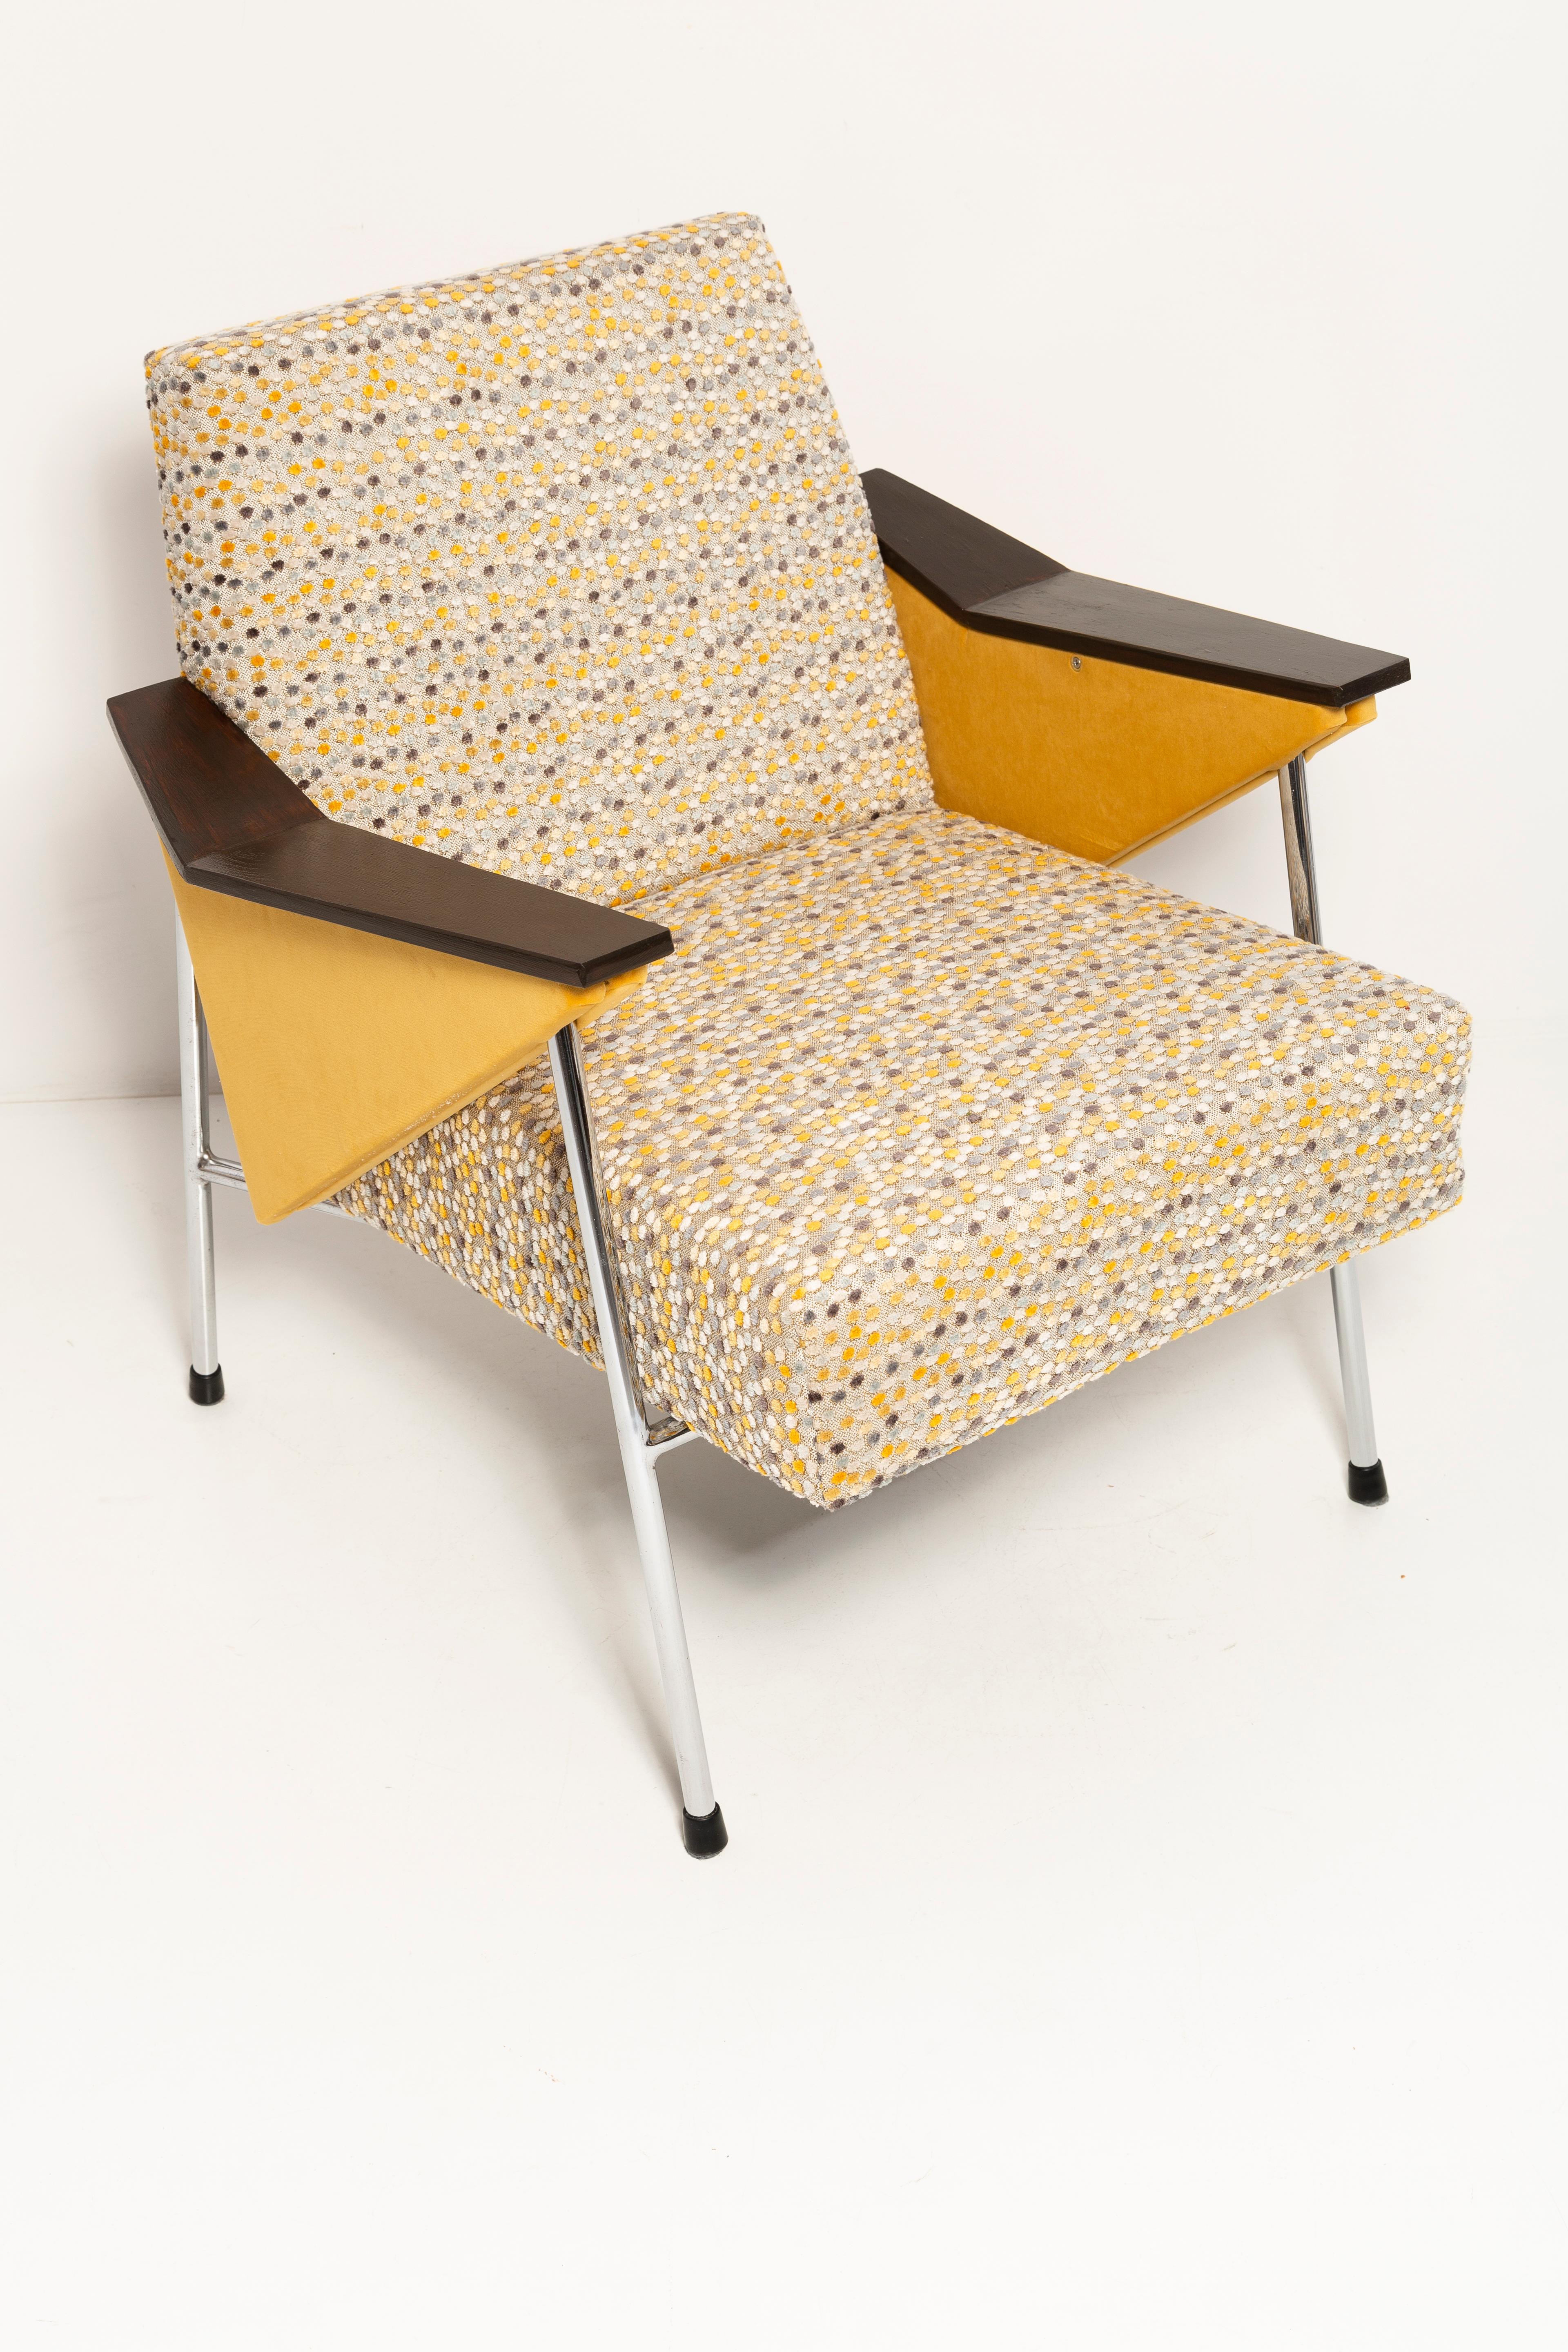 Hand-Crafted Pair of Mid Century Bat Armchairs, Yellow Dots, Bauhaus Style, Poland, 1970s. For Sale